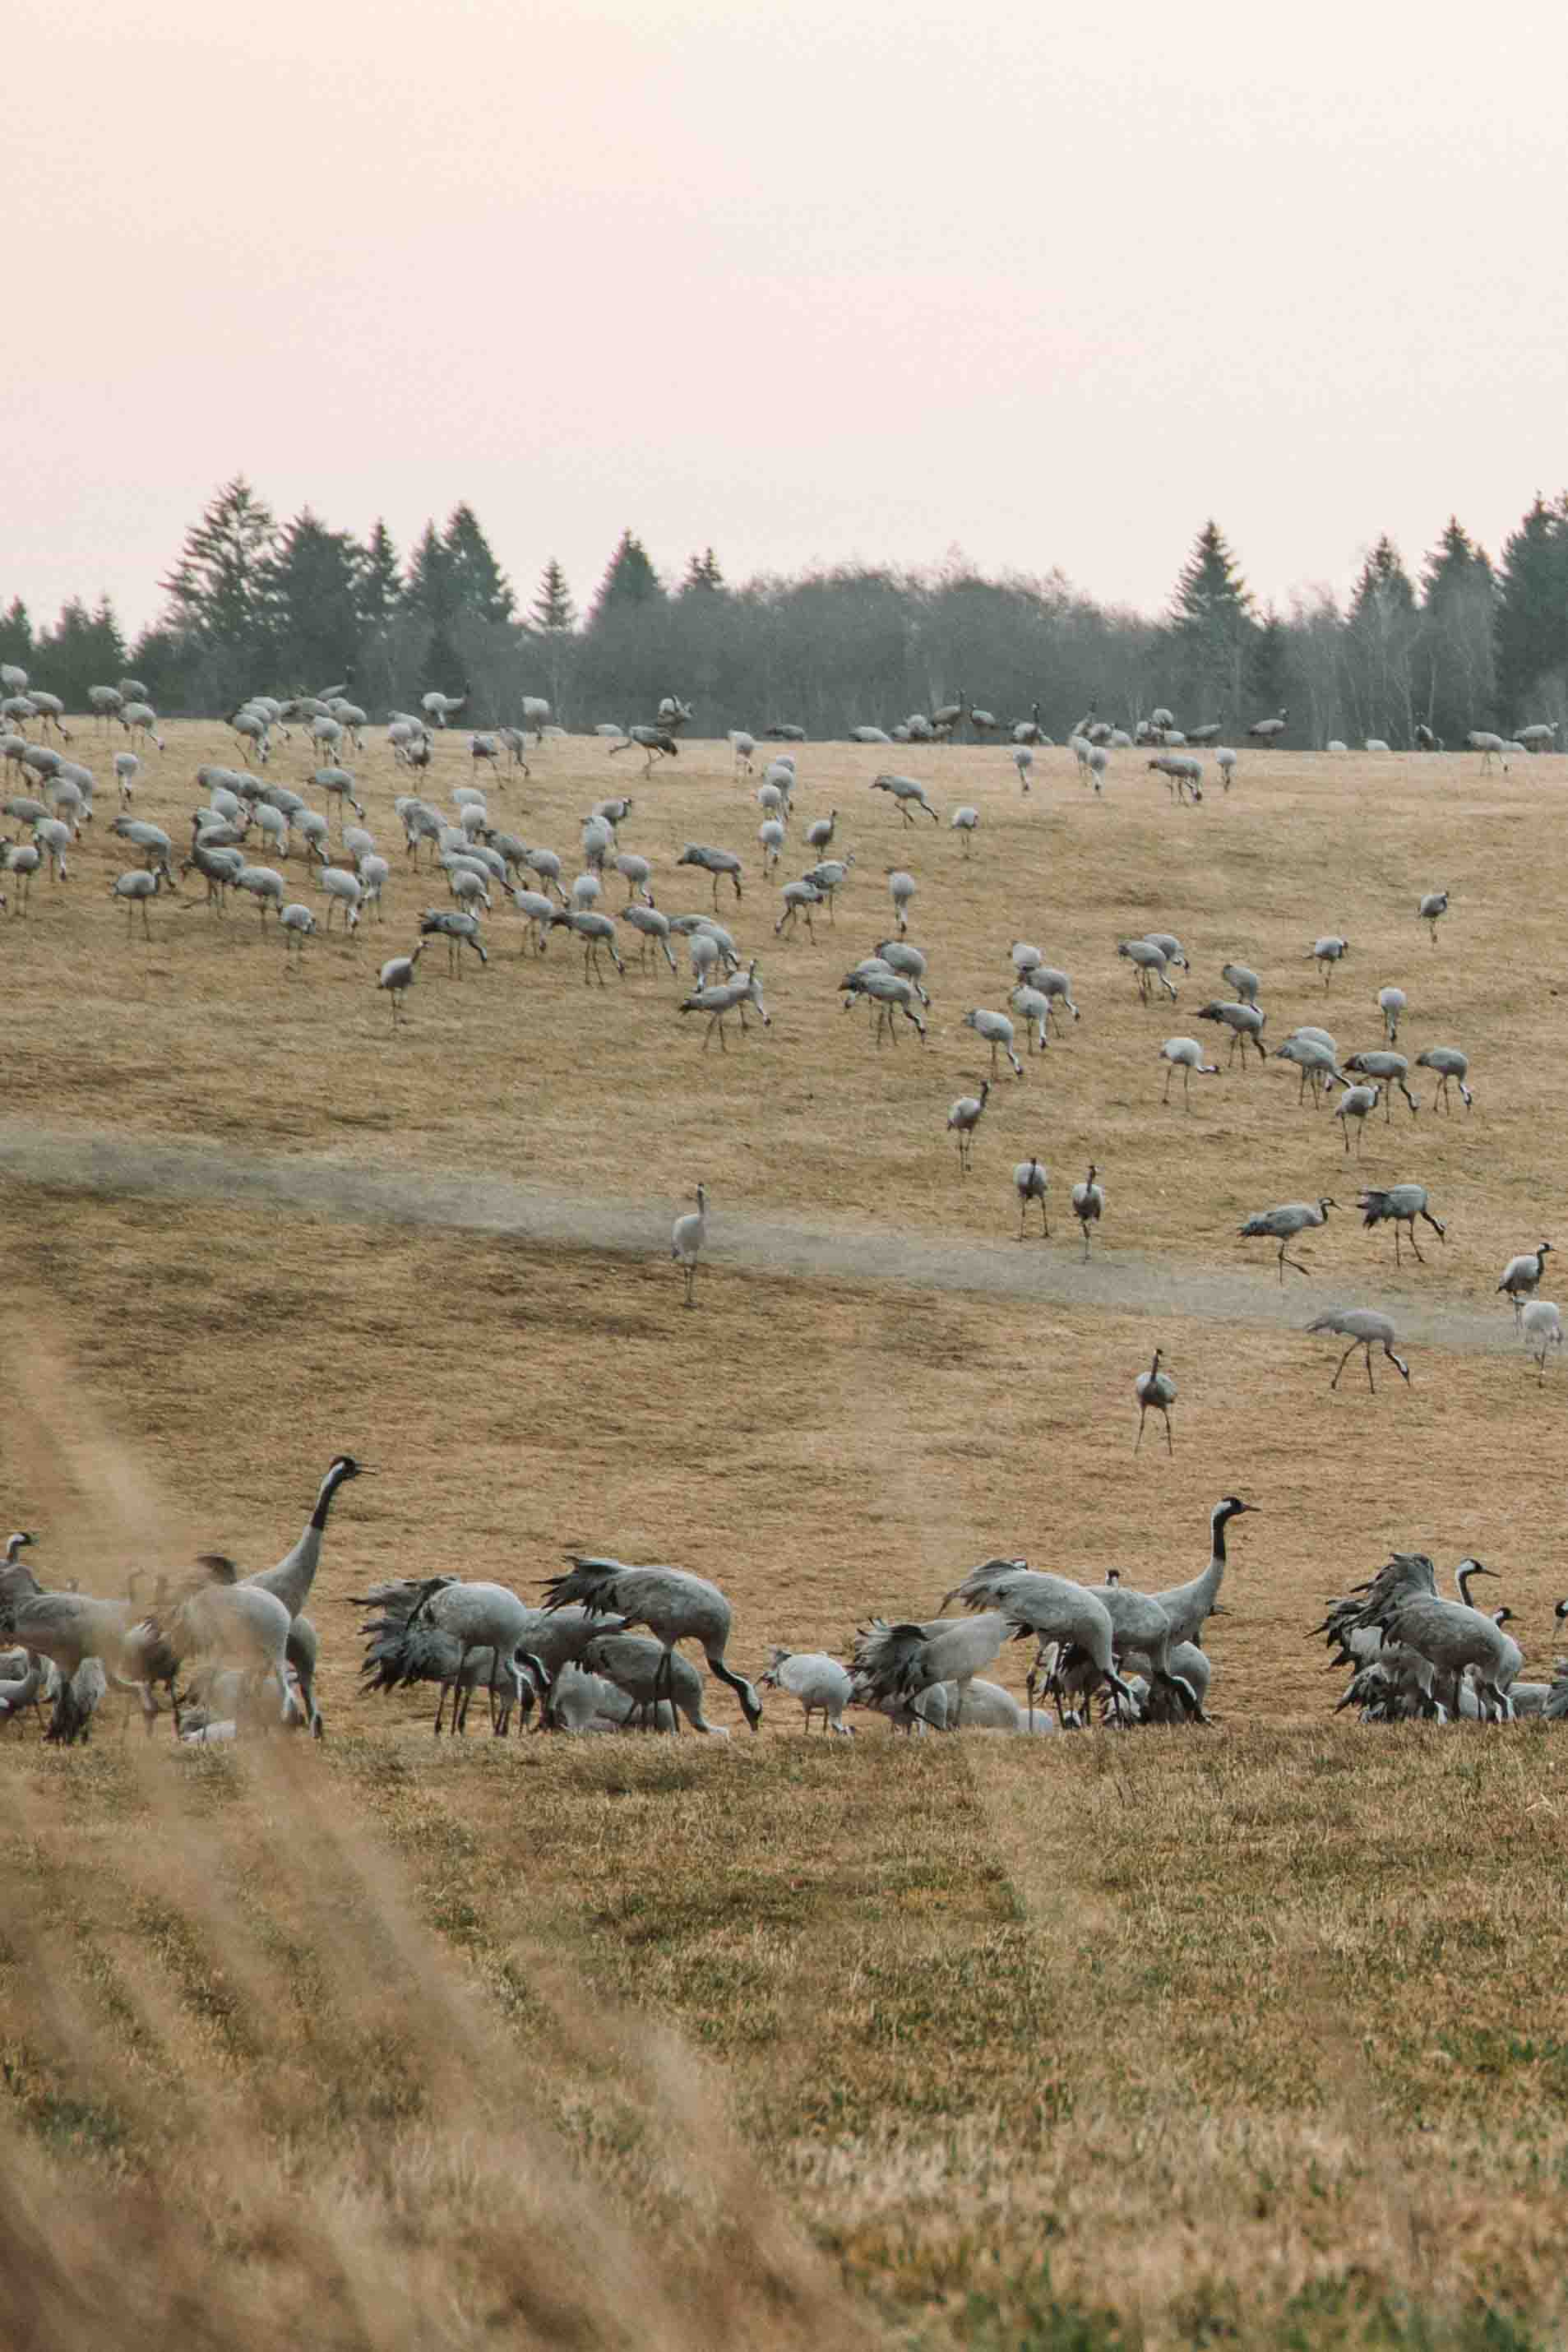 cranes gathered in a field by lake hornborga